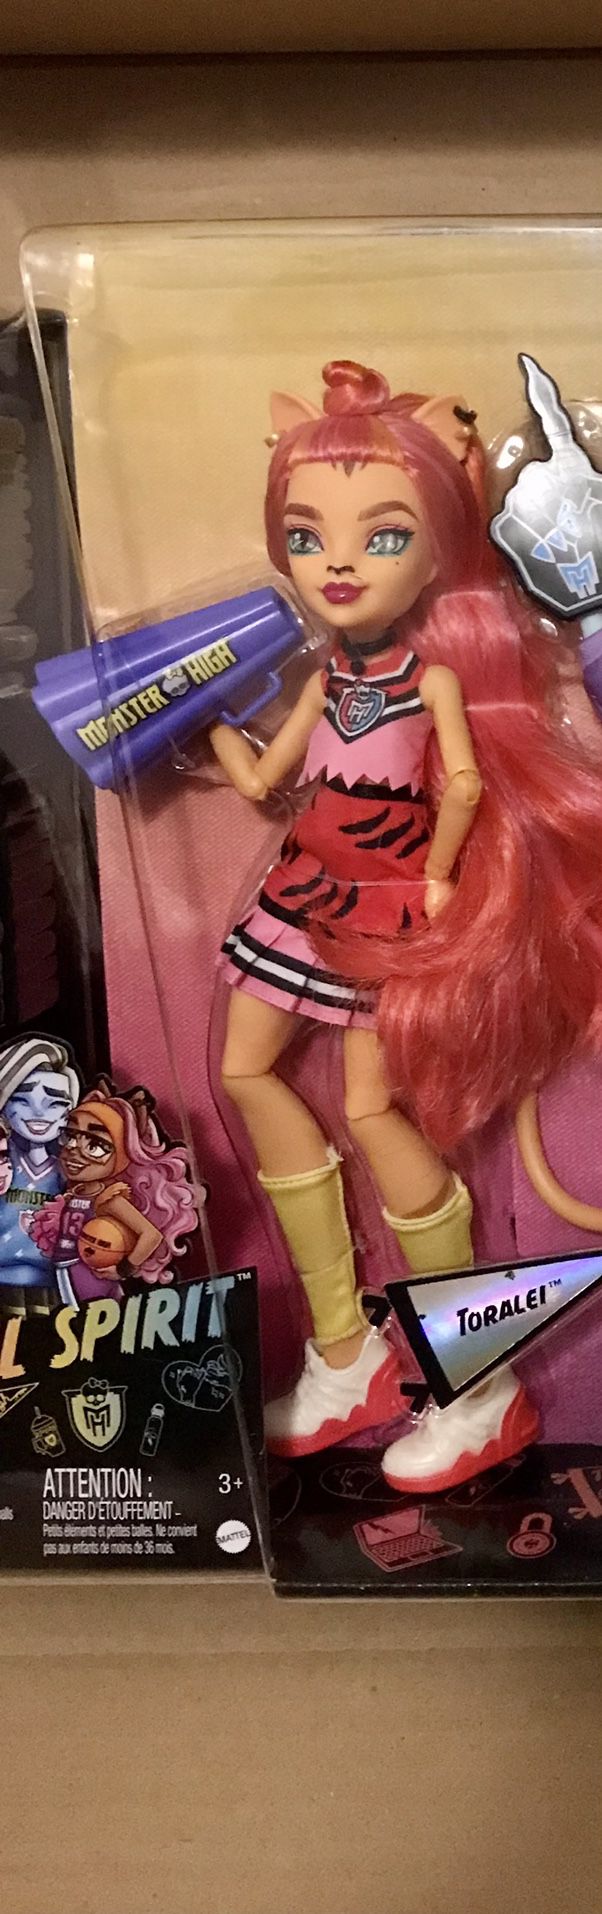 Monster High Toralei Generation 3 G3 Reboot NEW! Doll is taken out of the Ghoul Spirit 6 pack. Loose, No doll box. Will be put in a shipping box! I ha